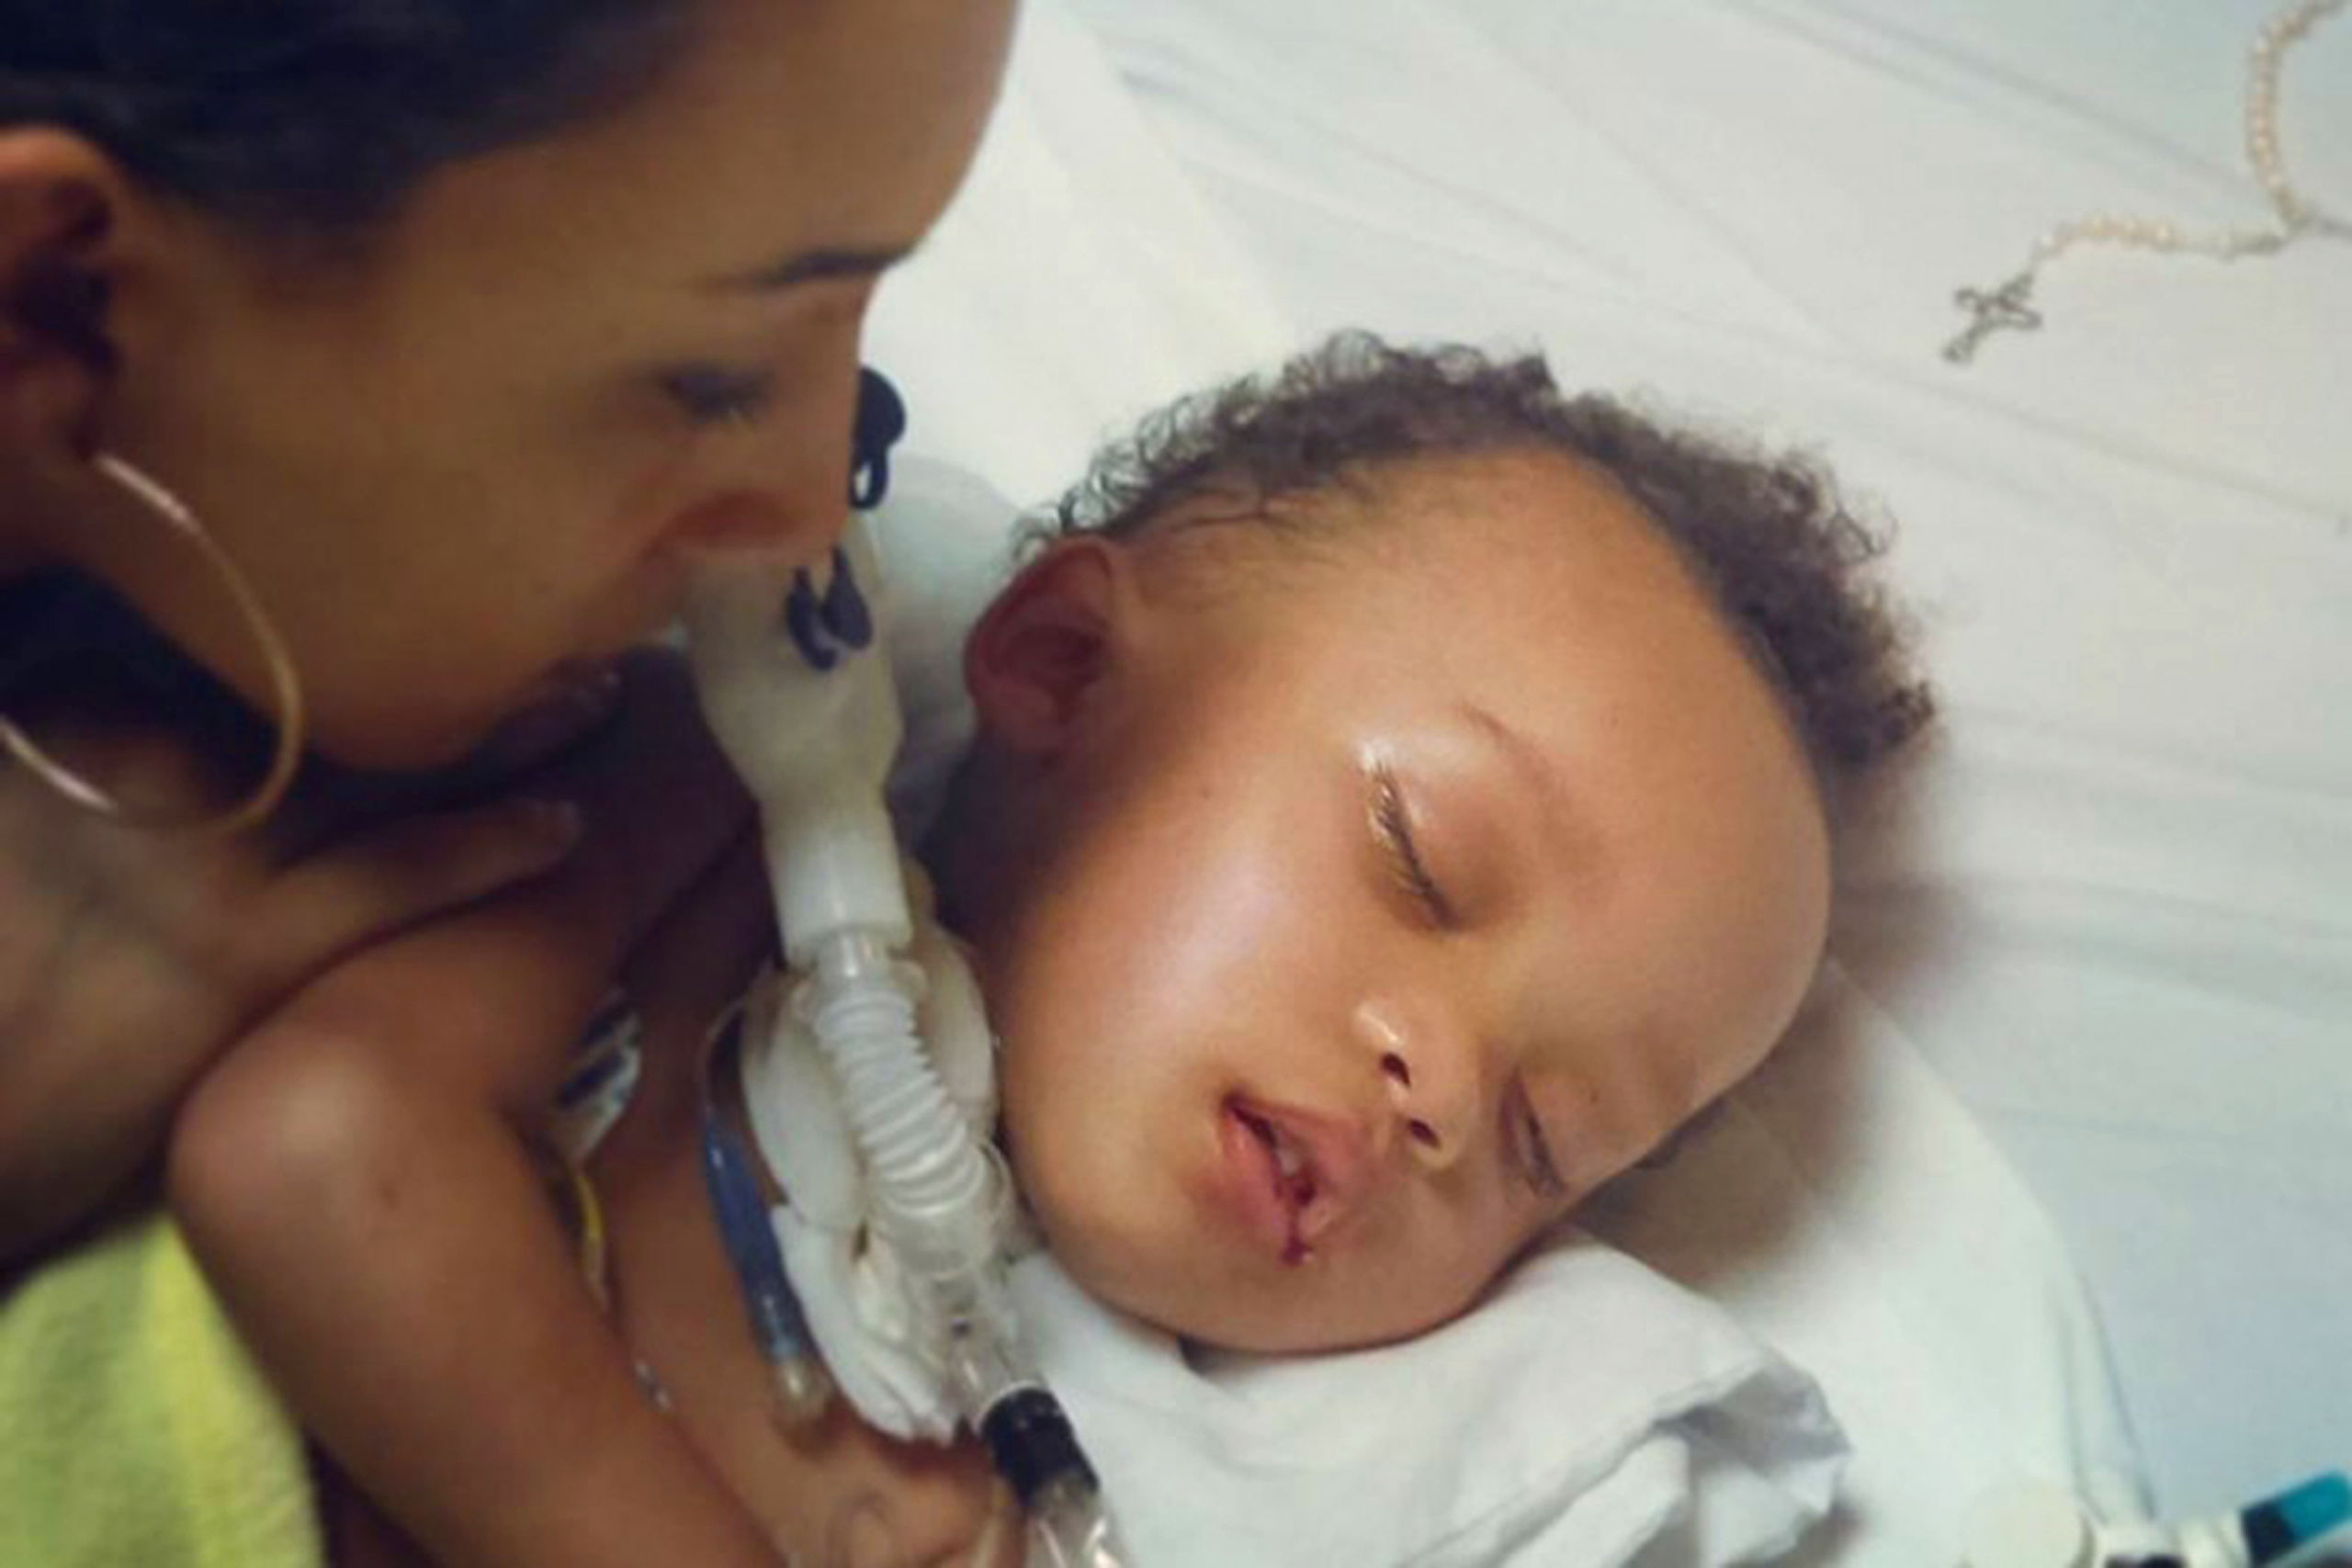 Jonee Fonseca with her 2-year-old son Israel Stinson while on life support in a California hospital, in an undated photo provided by her. The brain-dead toddler died Thursday, Aug. 25, 2016, soon after being taken off life support under a judge's order. (Jonee Fonseca—Handout/AP)